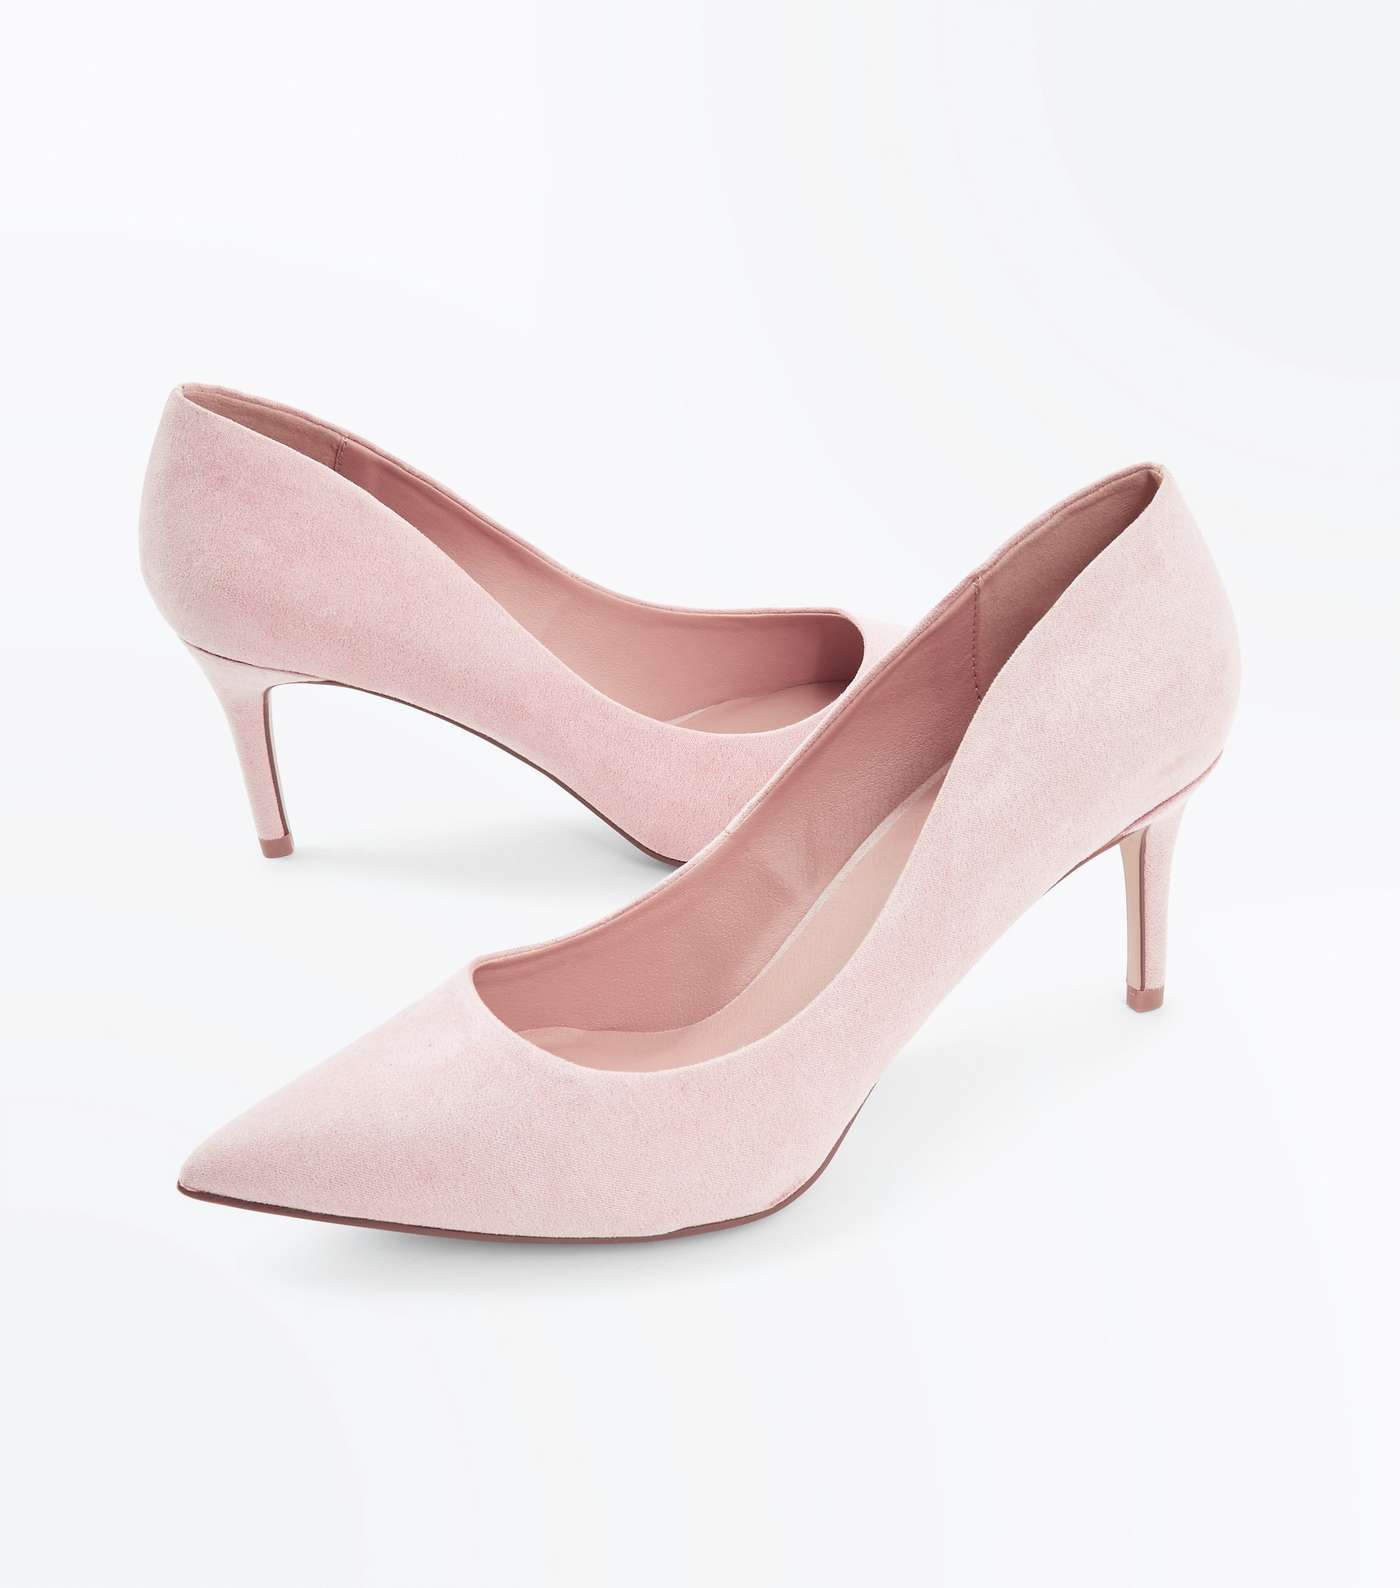 Nude Suedette Mid Heel Court Shoes Image 3